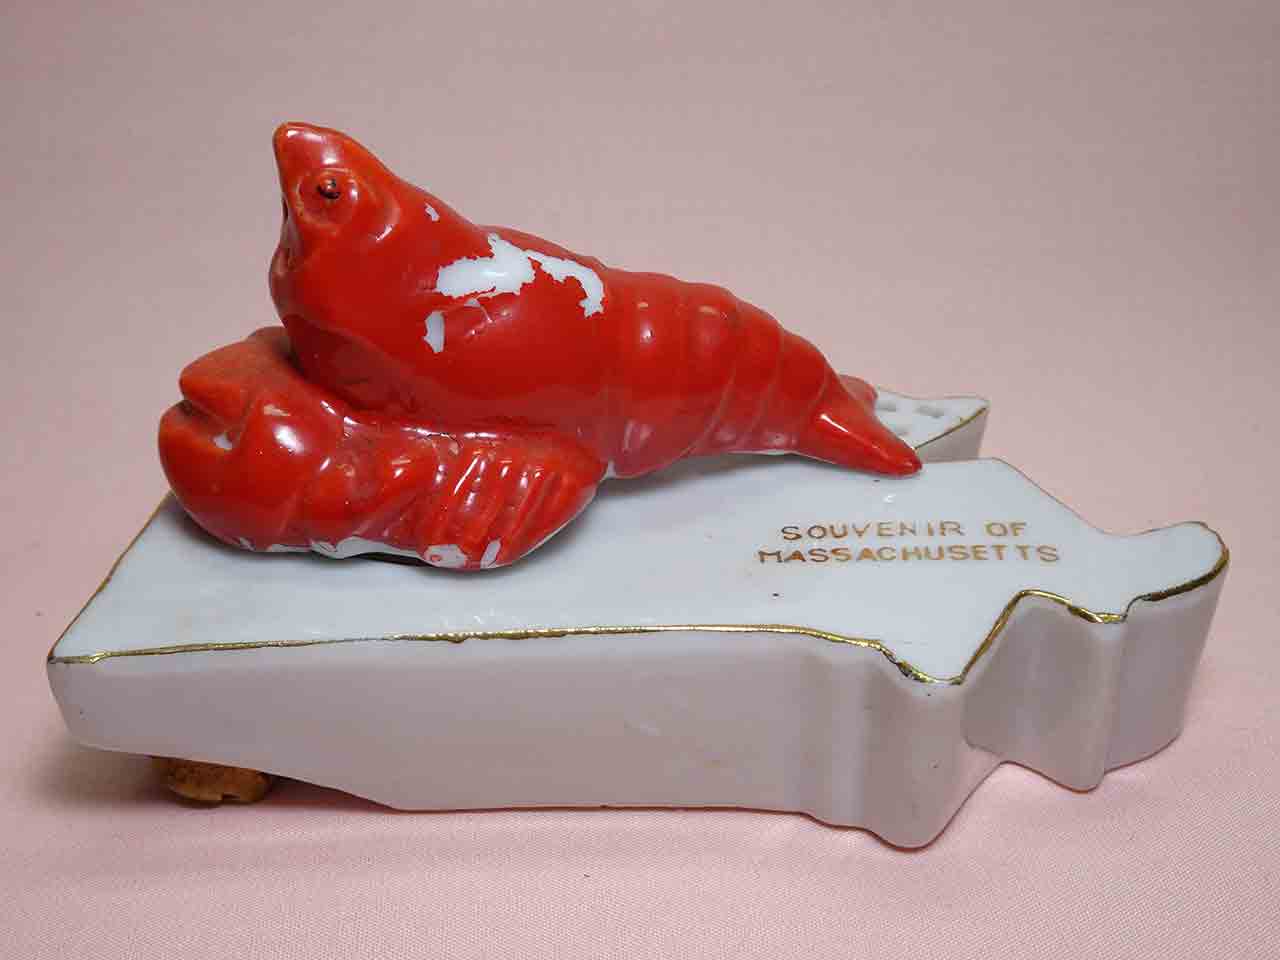 Massachusetts with lobster salt and pepper shakers